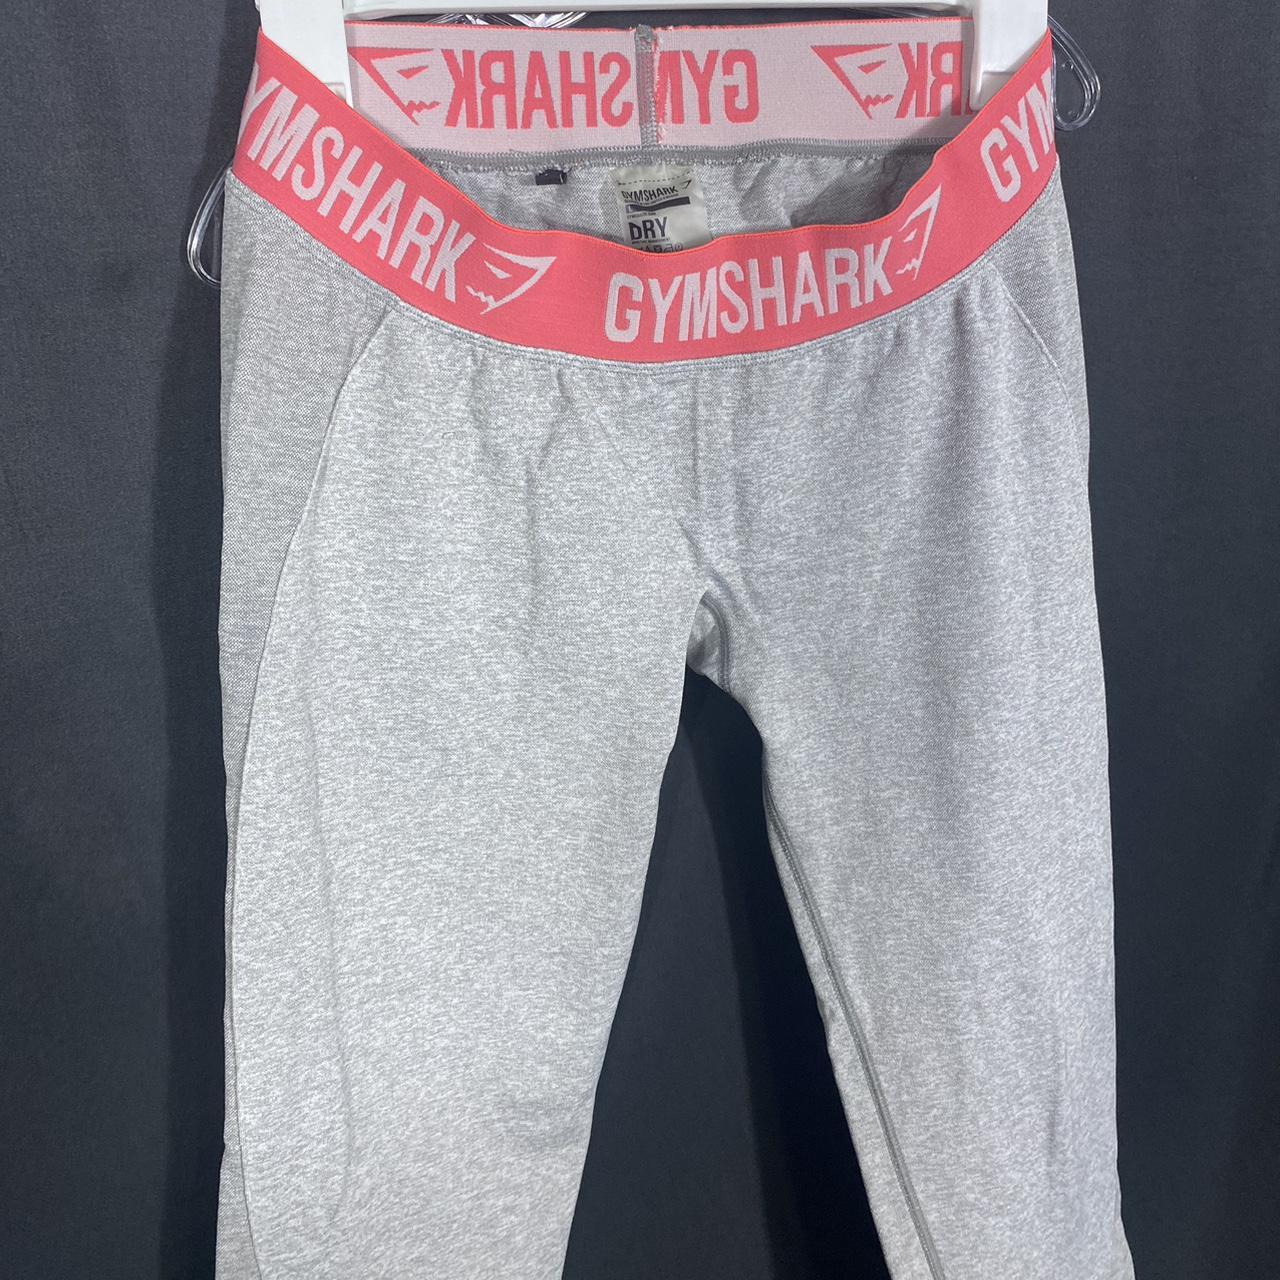 Women's Gymshark leggings Gray and pink dry workout - Depop